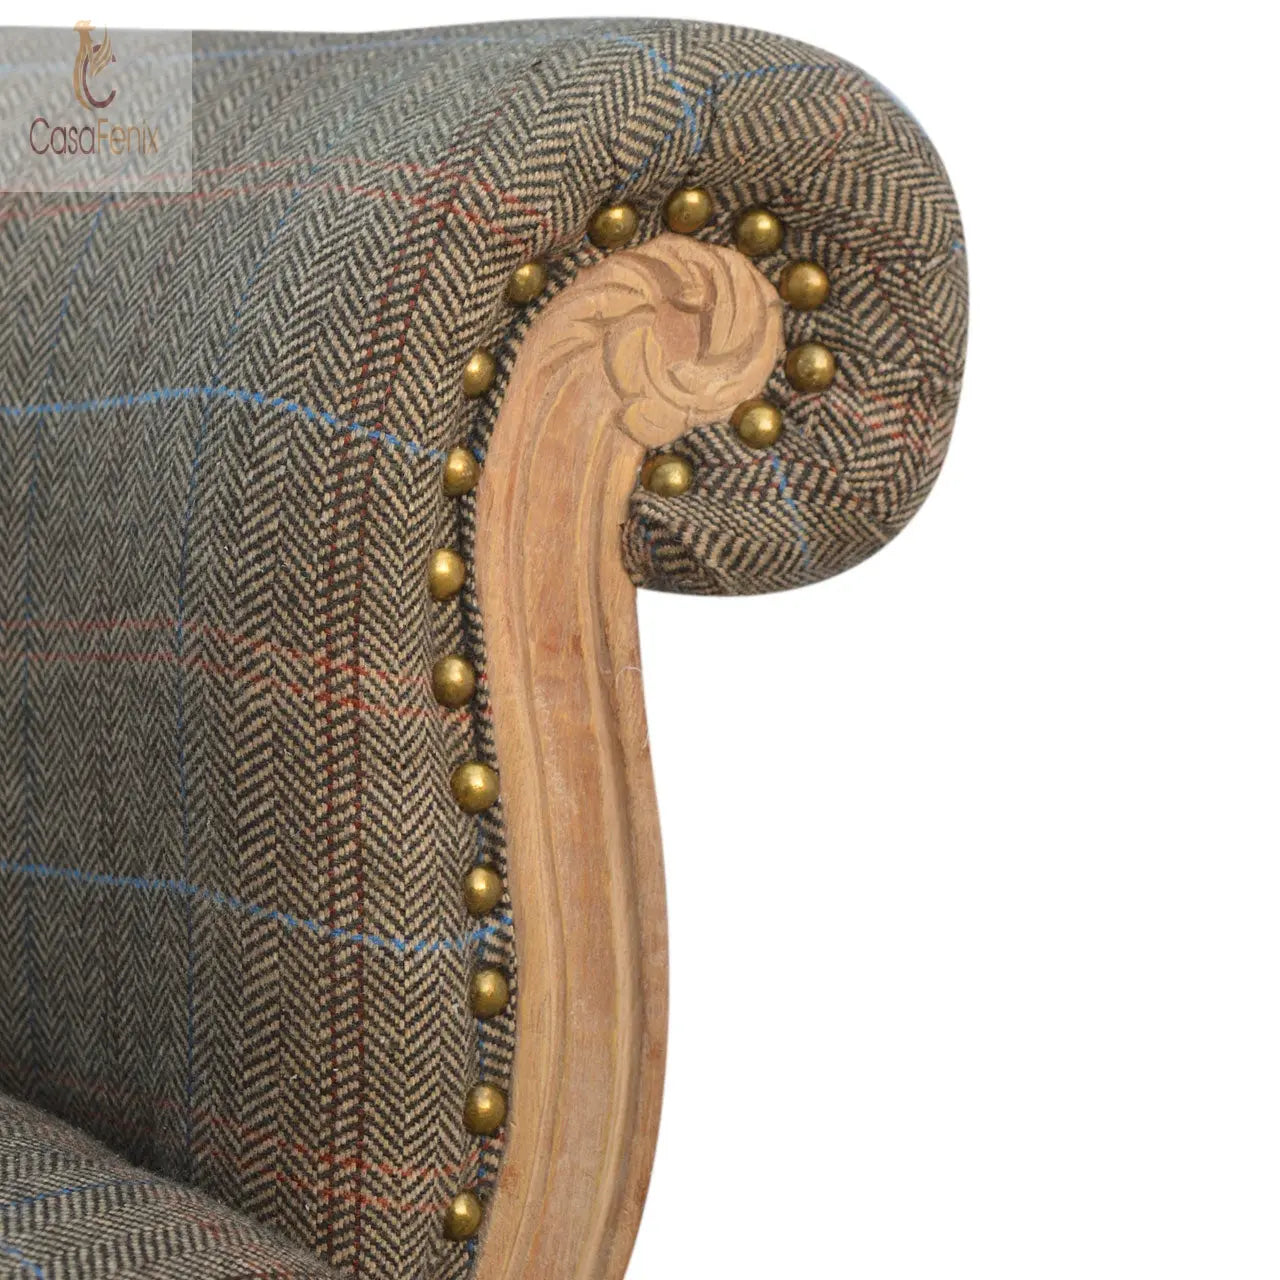 Small Multi Tweed French Chantilly style Chair 100% solid mango wood and upholstered in 100% multi tweed - CasaFenix